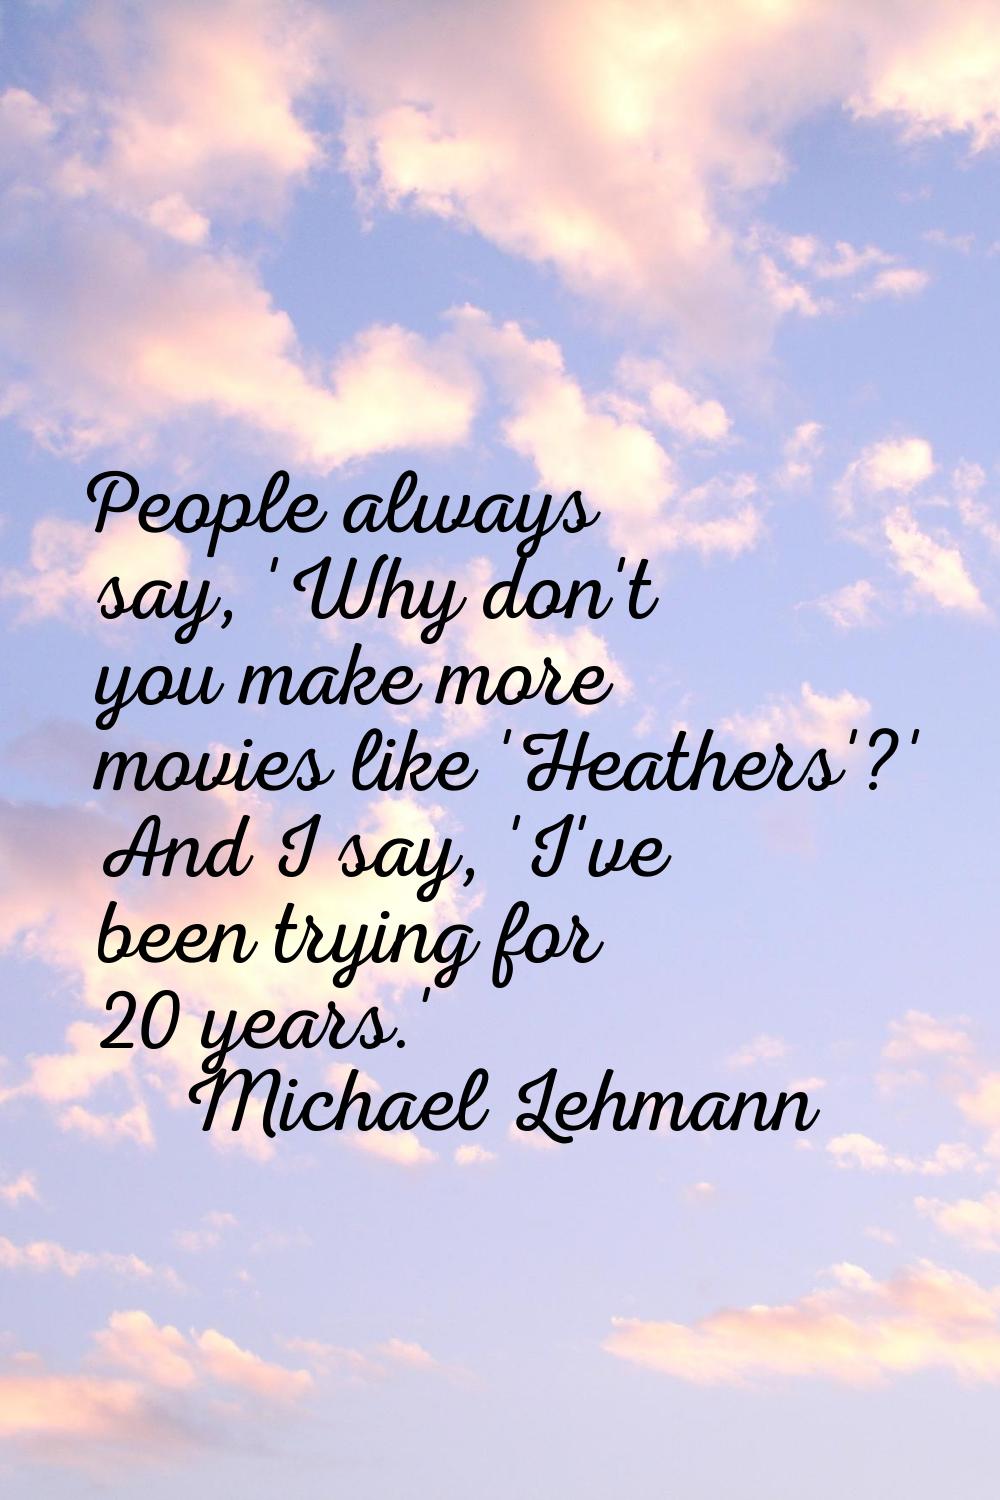 People always say, 'Why don't you make more movies like 'Heathers'?' And I say, 'I've been trying f